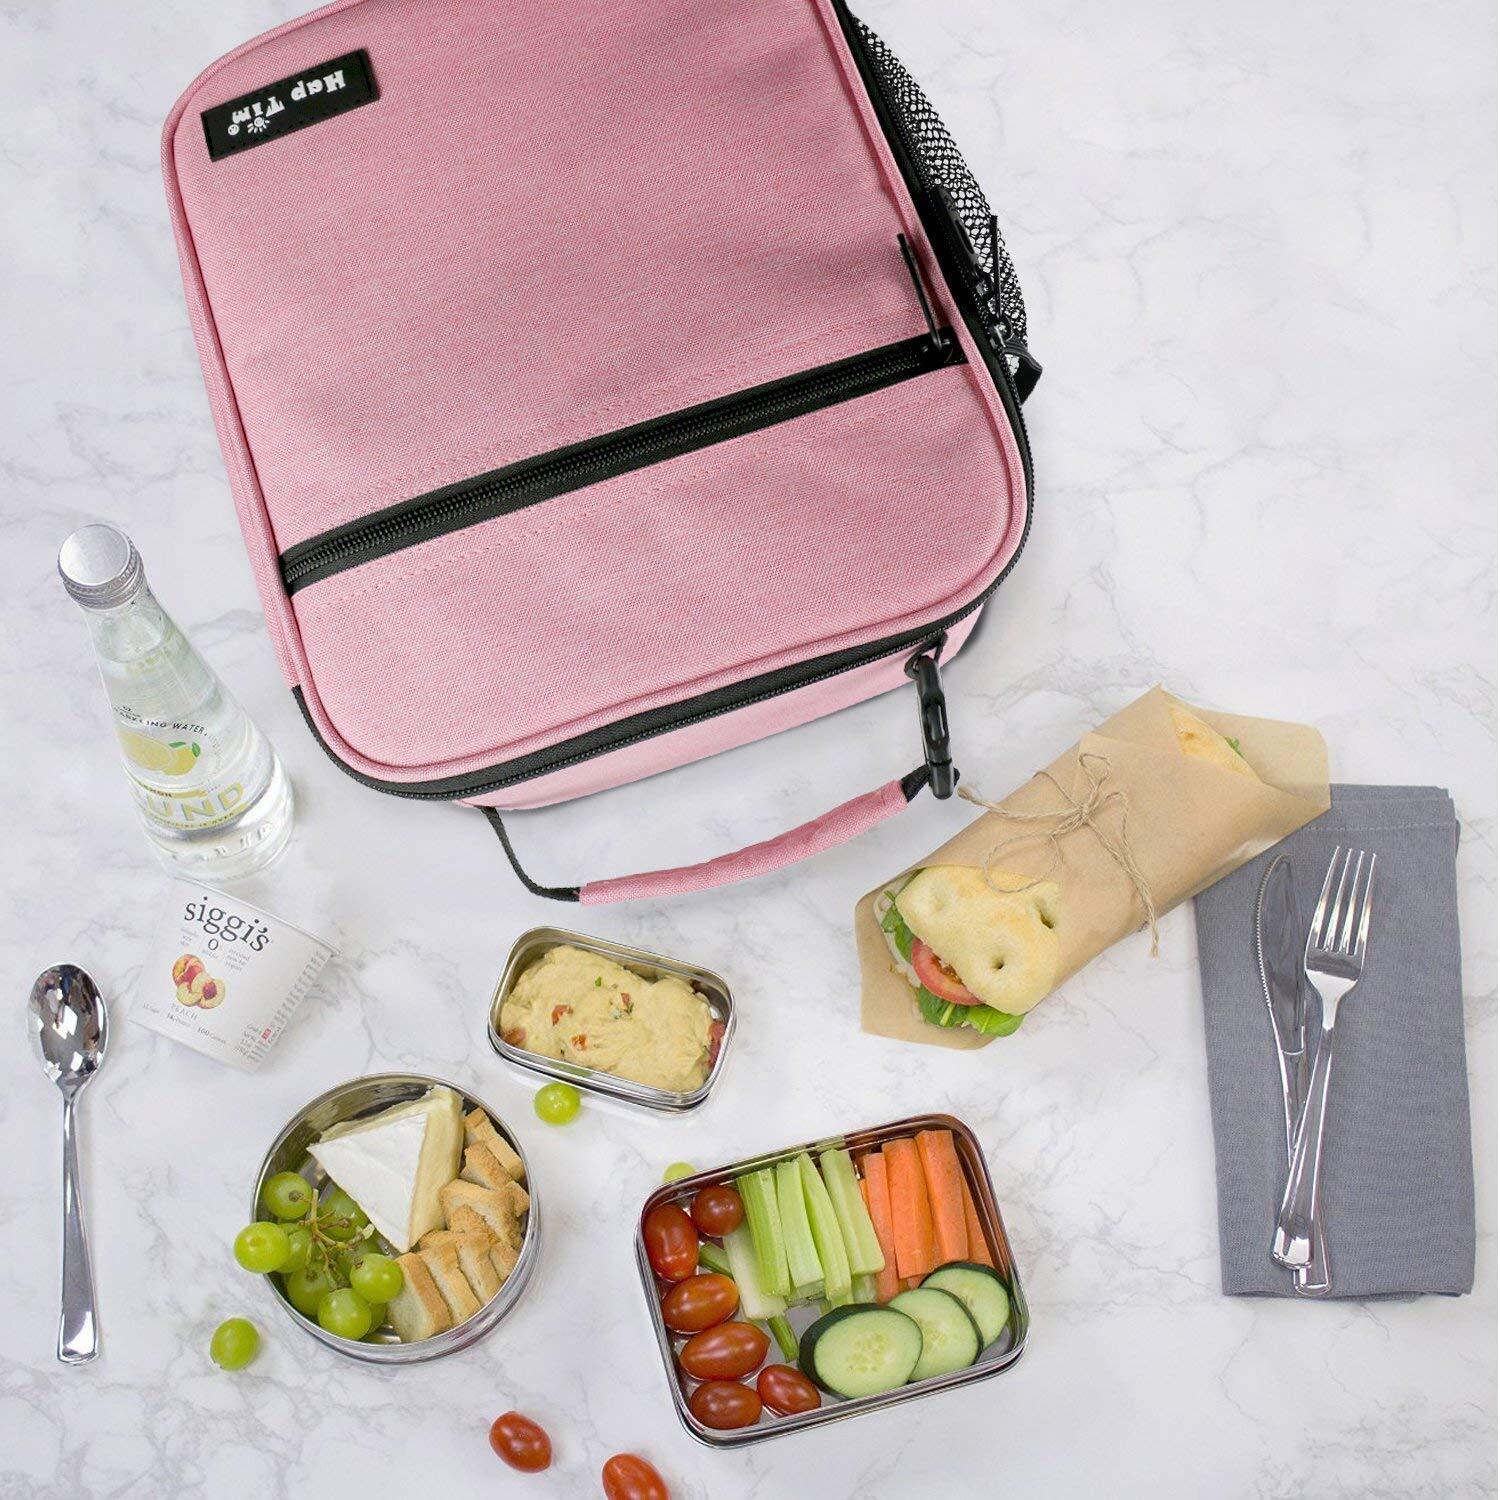 https://images.51microshop.com/1658/product/20180927/Hap_Tim_Insulated_Lunch_Bag_Women_Girls_Reusable_Lunch_Box_Kids_Girls_Spacious_Lunchbox_Adult_Cooler_Bag_18654_PK__1538012501068_0.jpg